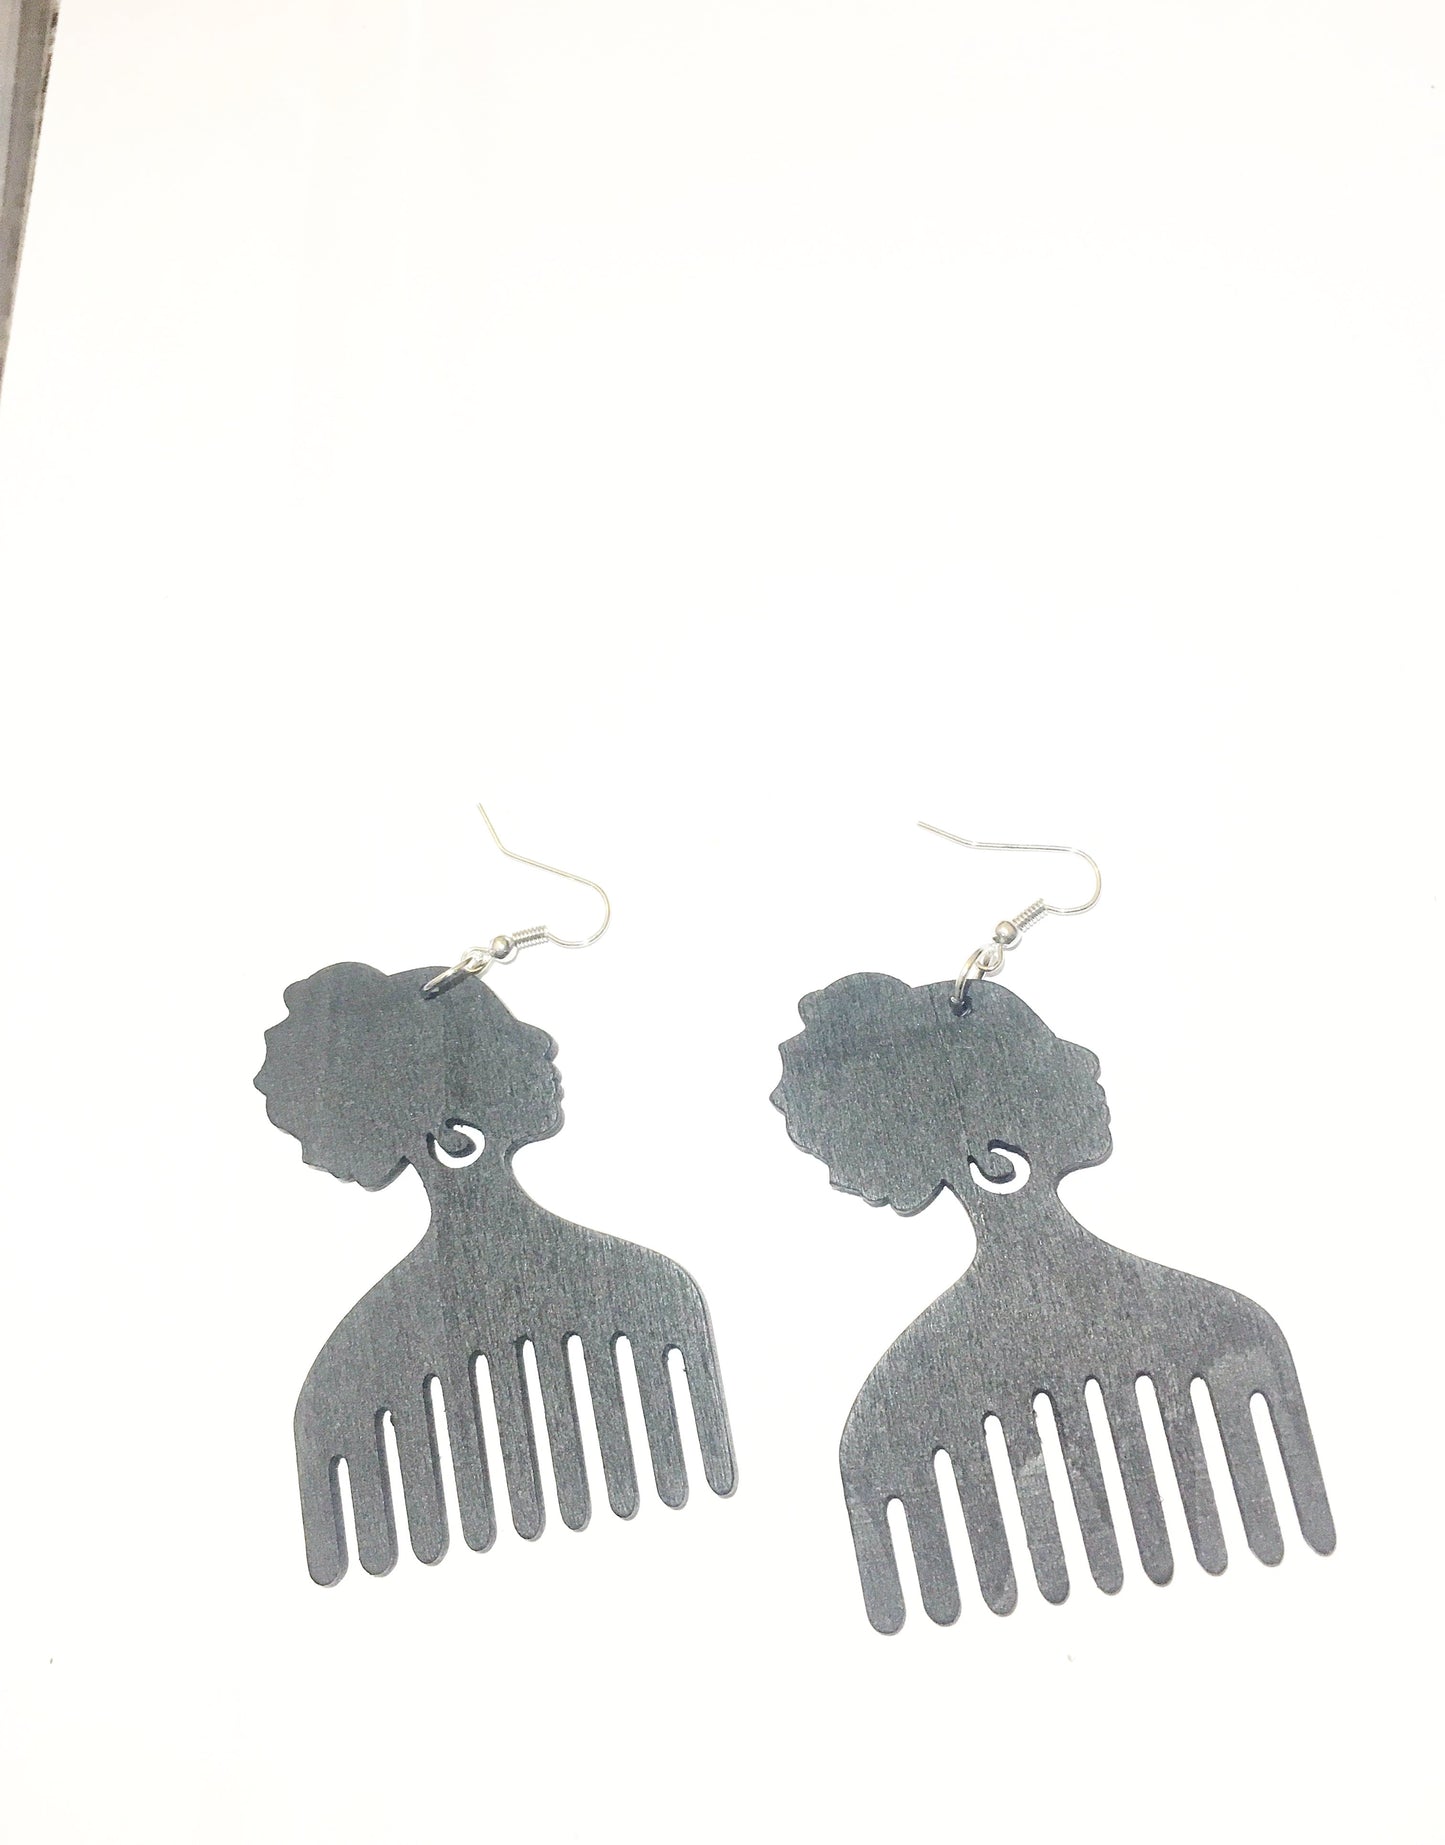 Afro Head - Afro Comb Wooden Earrings